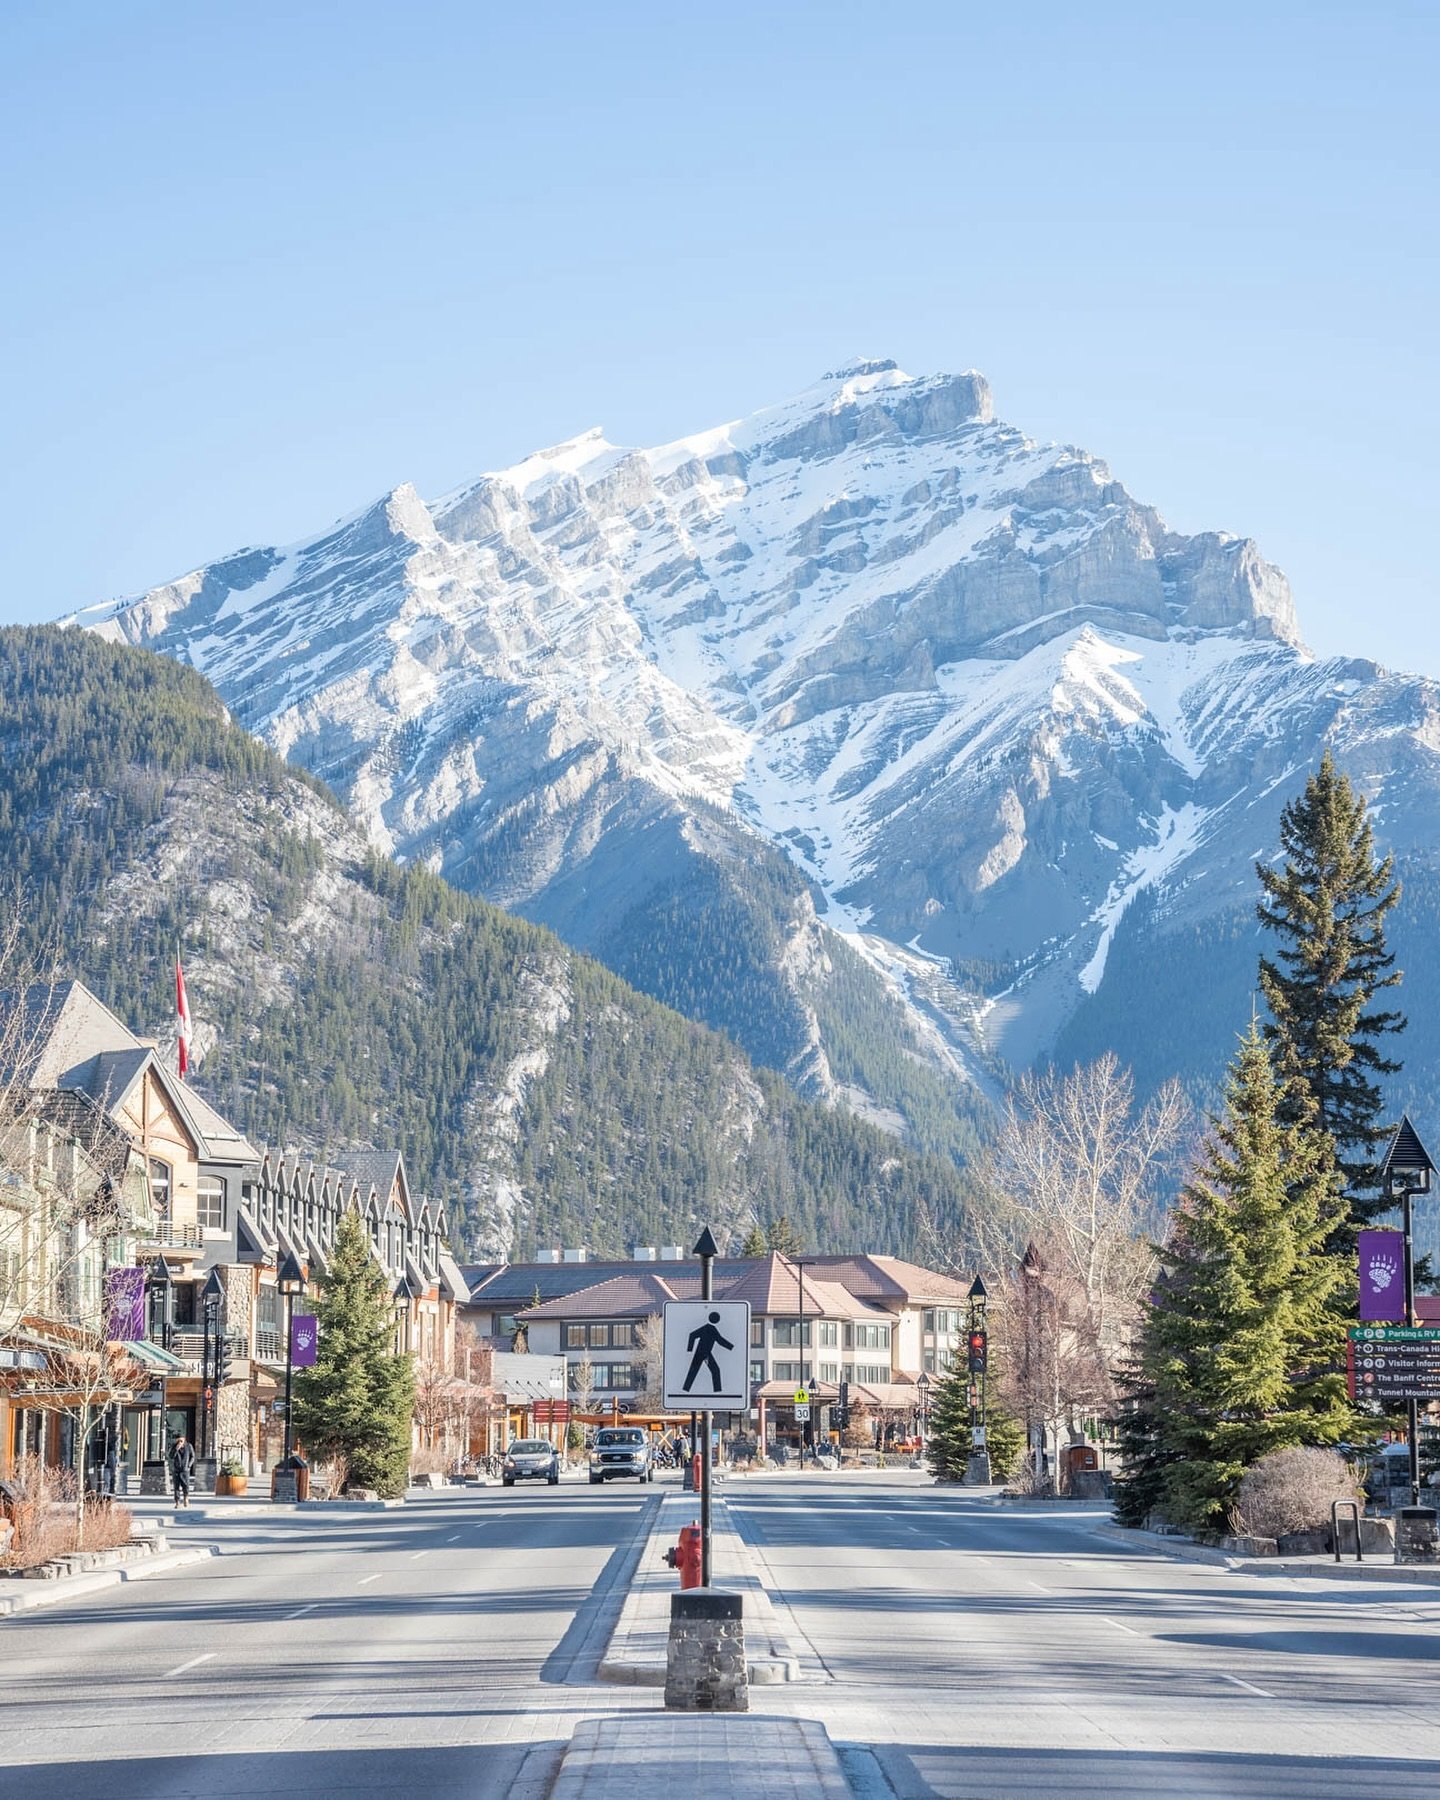 Located in the heart of the Canadian Rockies, Banff Avenue is a picturesque thoroughfare that stretches through the charming town of Banff, Alberta.

It is lined with quaint shops, restaurants, and surrounded by breathtaking scenery, with Cascade Mou